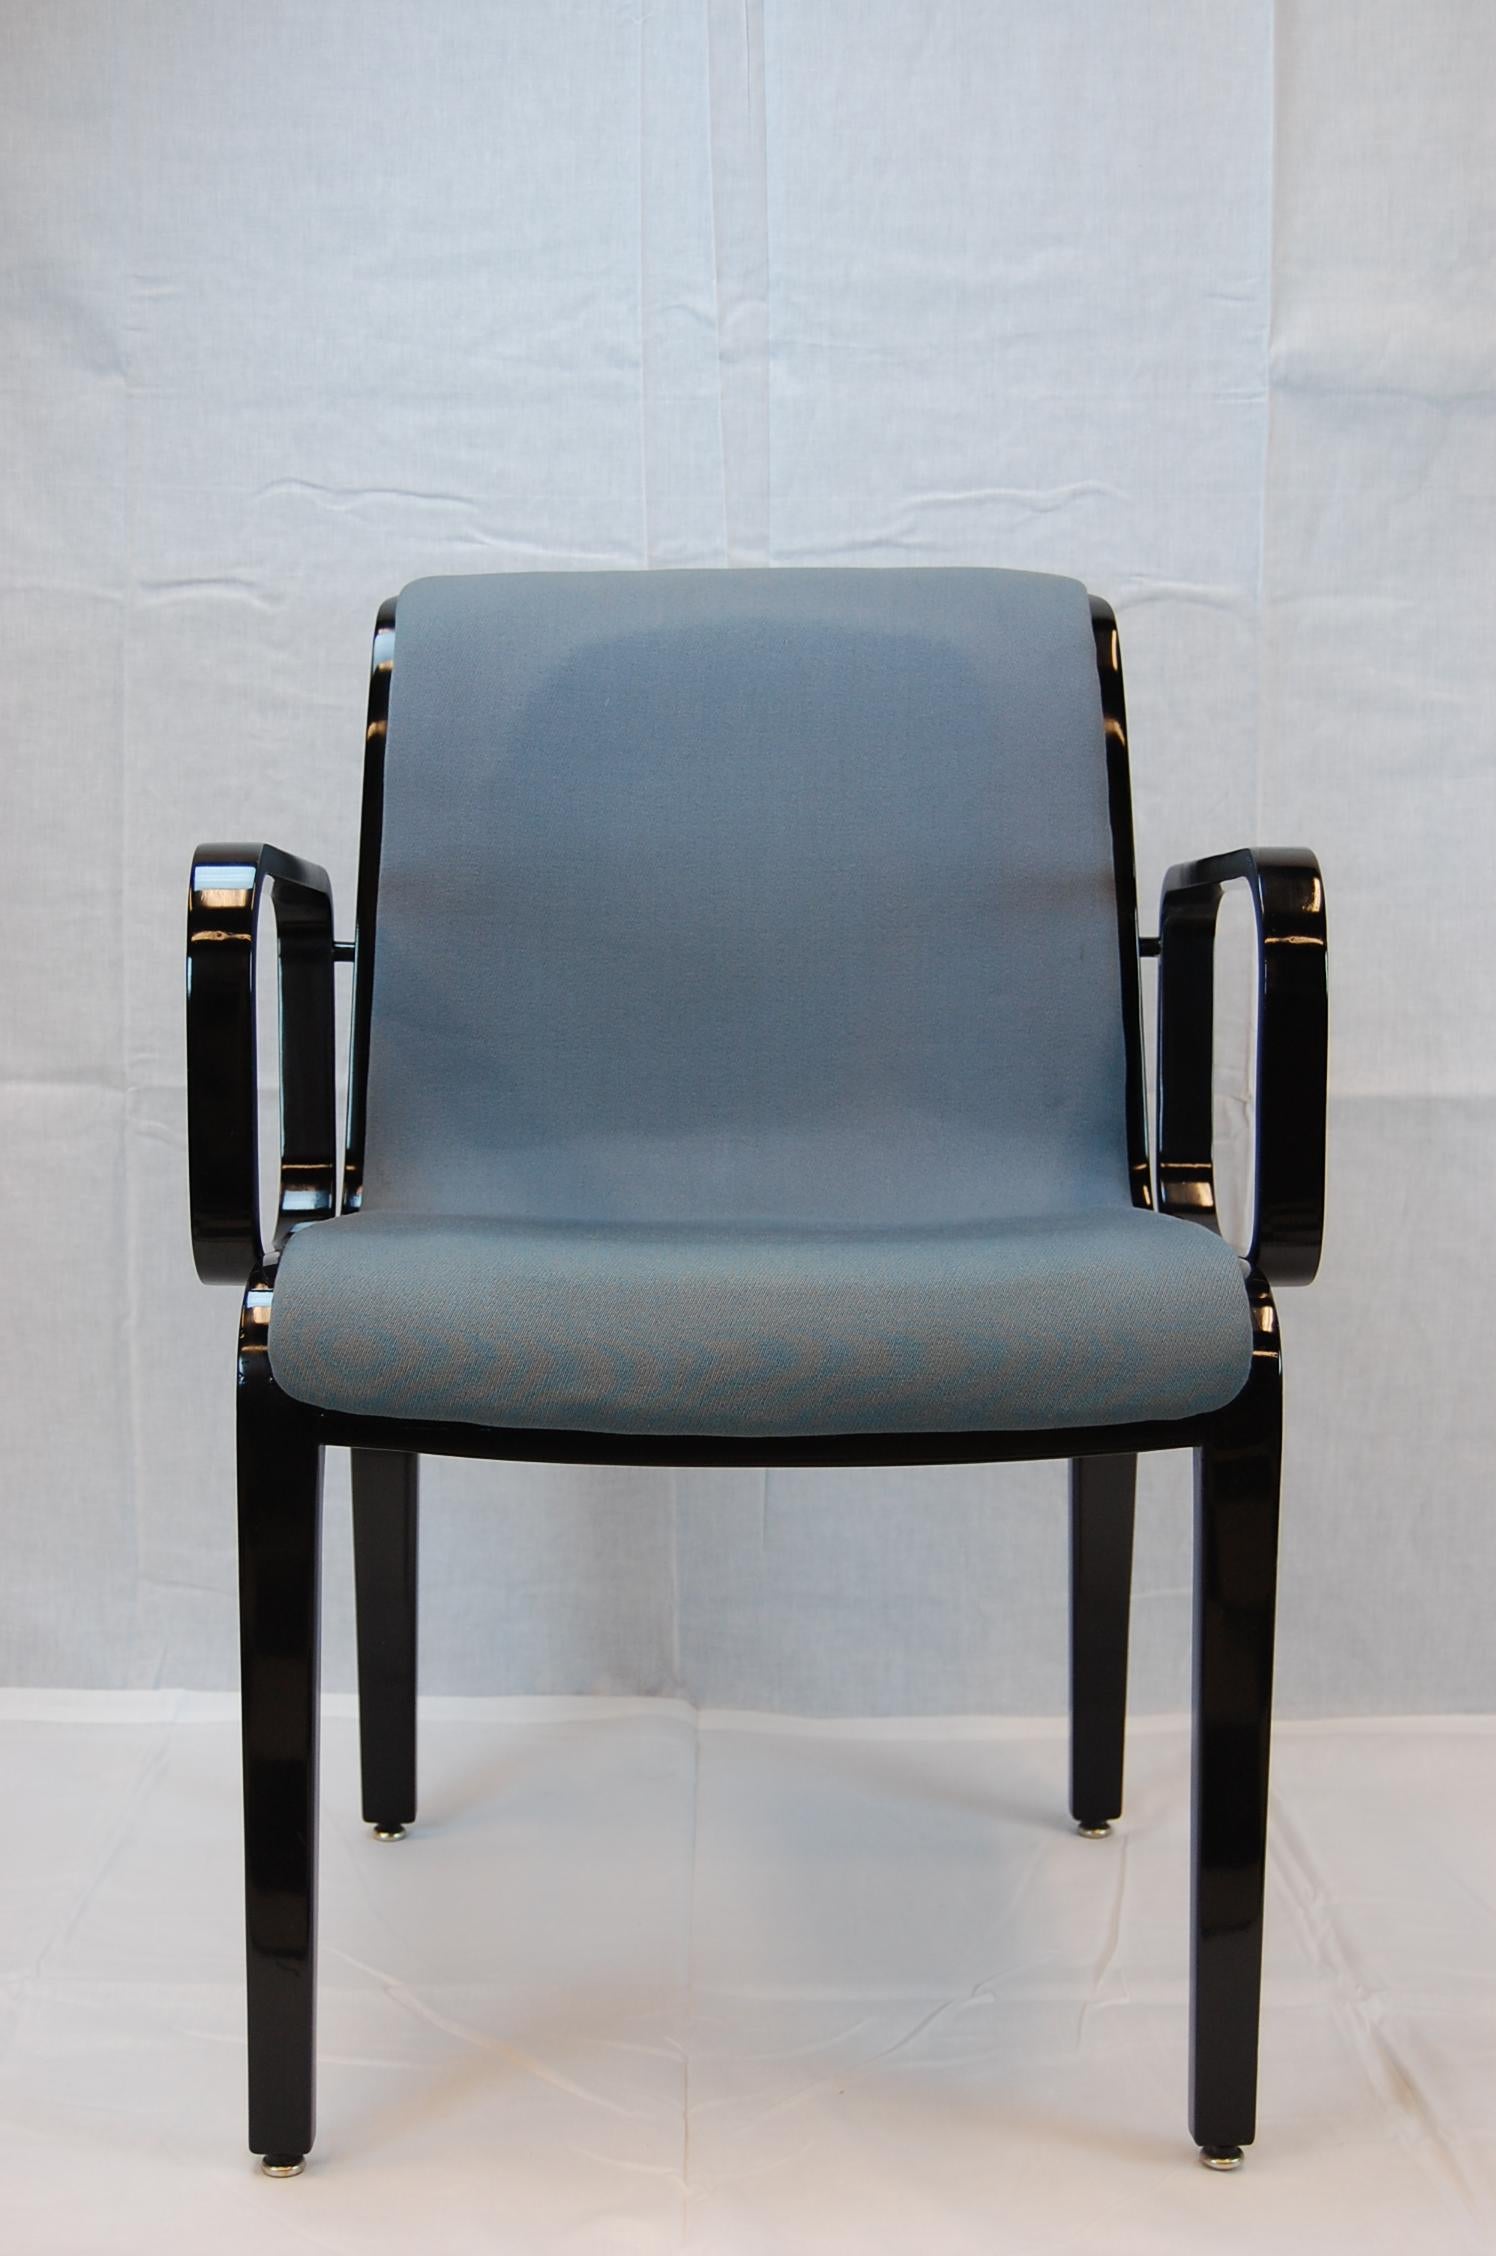 Black lacquered bentwood armchair by Bill Stephens for Knoll in excellent condition, still upholstered in its original blue-grey fabric. Original tag is stamped either 1990 or 1996.